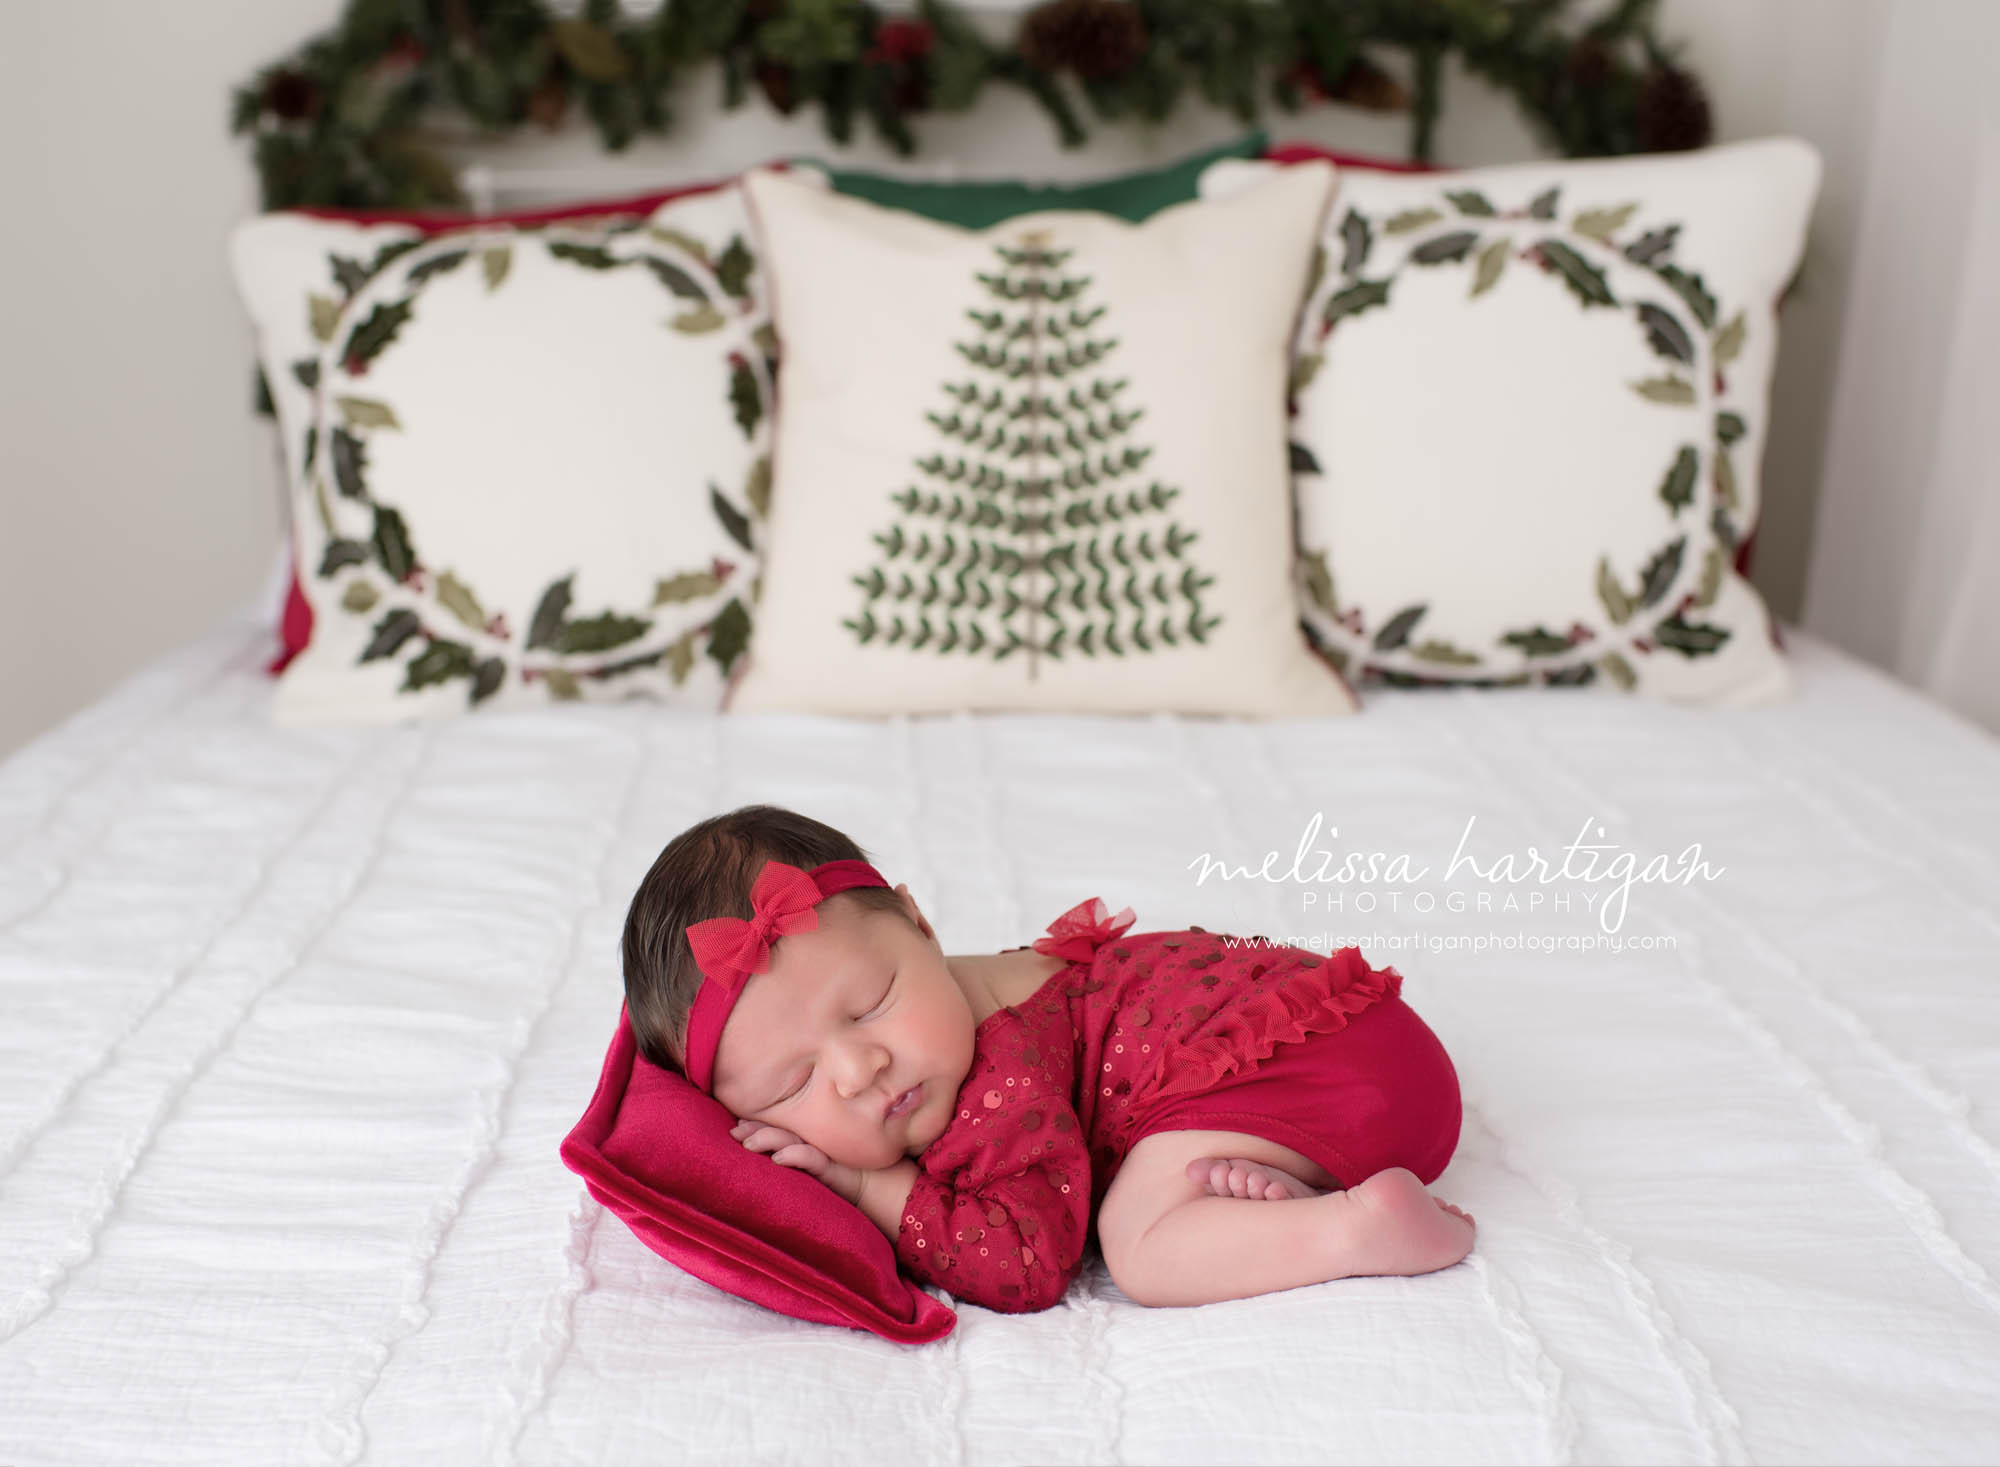 Melissa Hartigan Photography Connecticut Newborn Photographer trumbull Ct baby Fairfield county Baby girl Christmas theme red outfit with red headband on red pillow on bed with Christmas pillows sleeping Ct mini newborn session